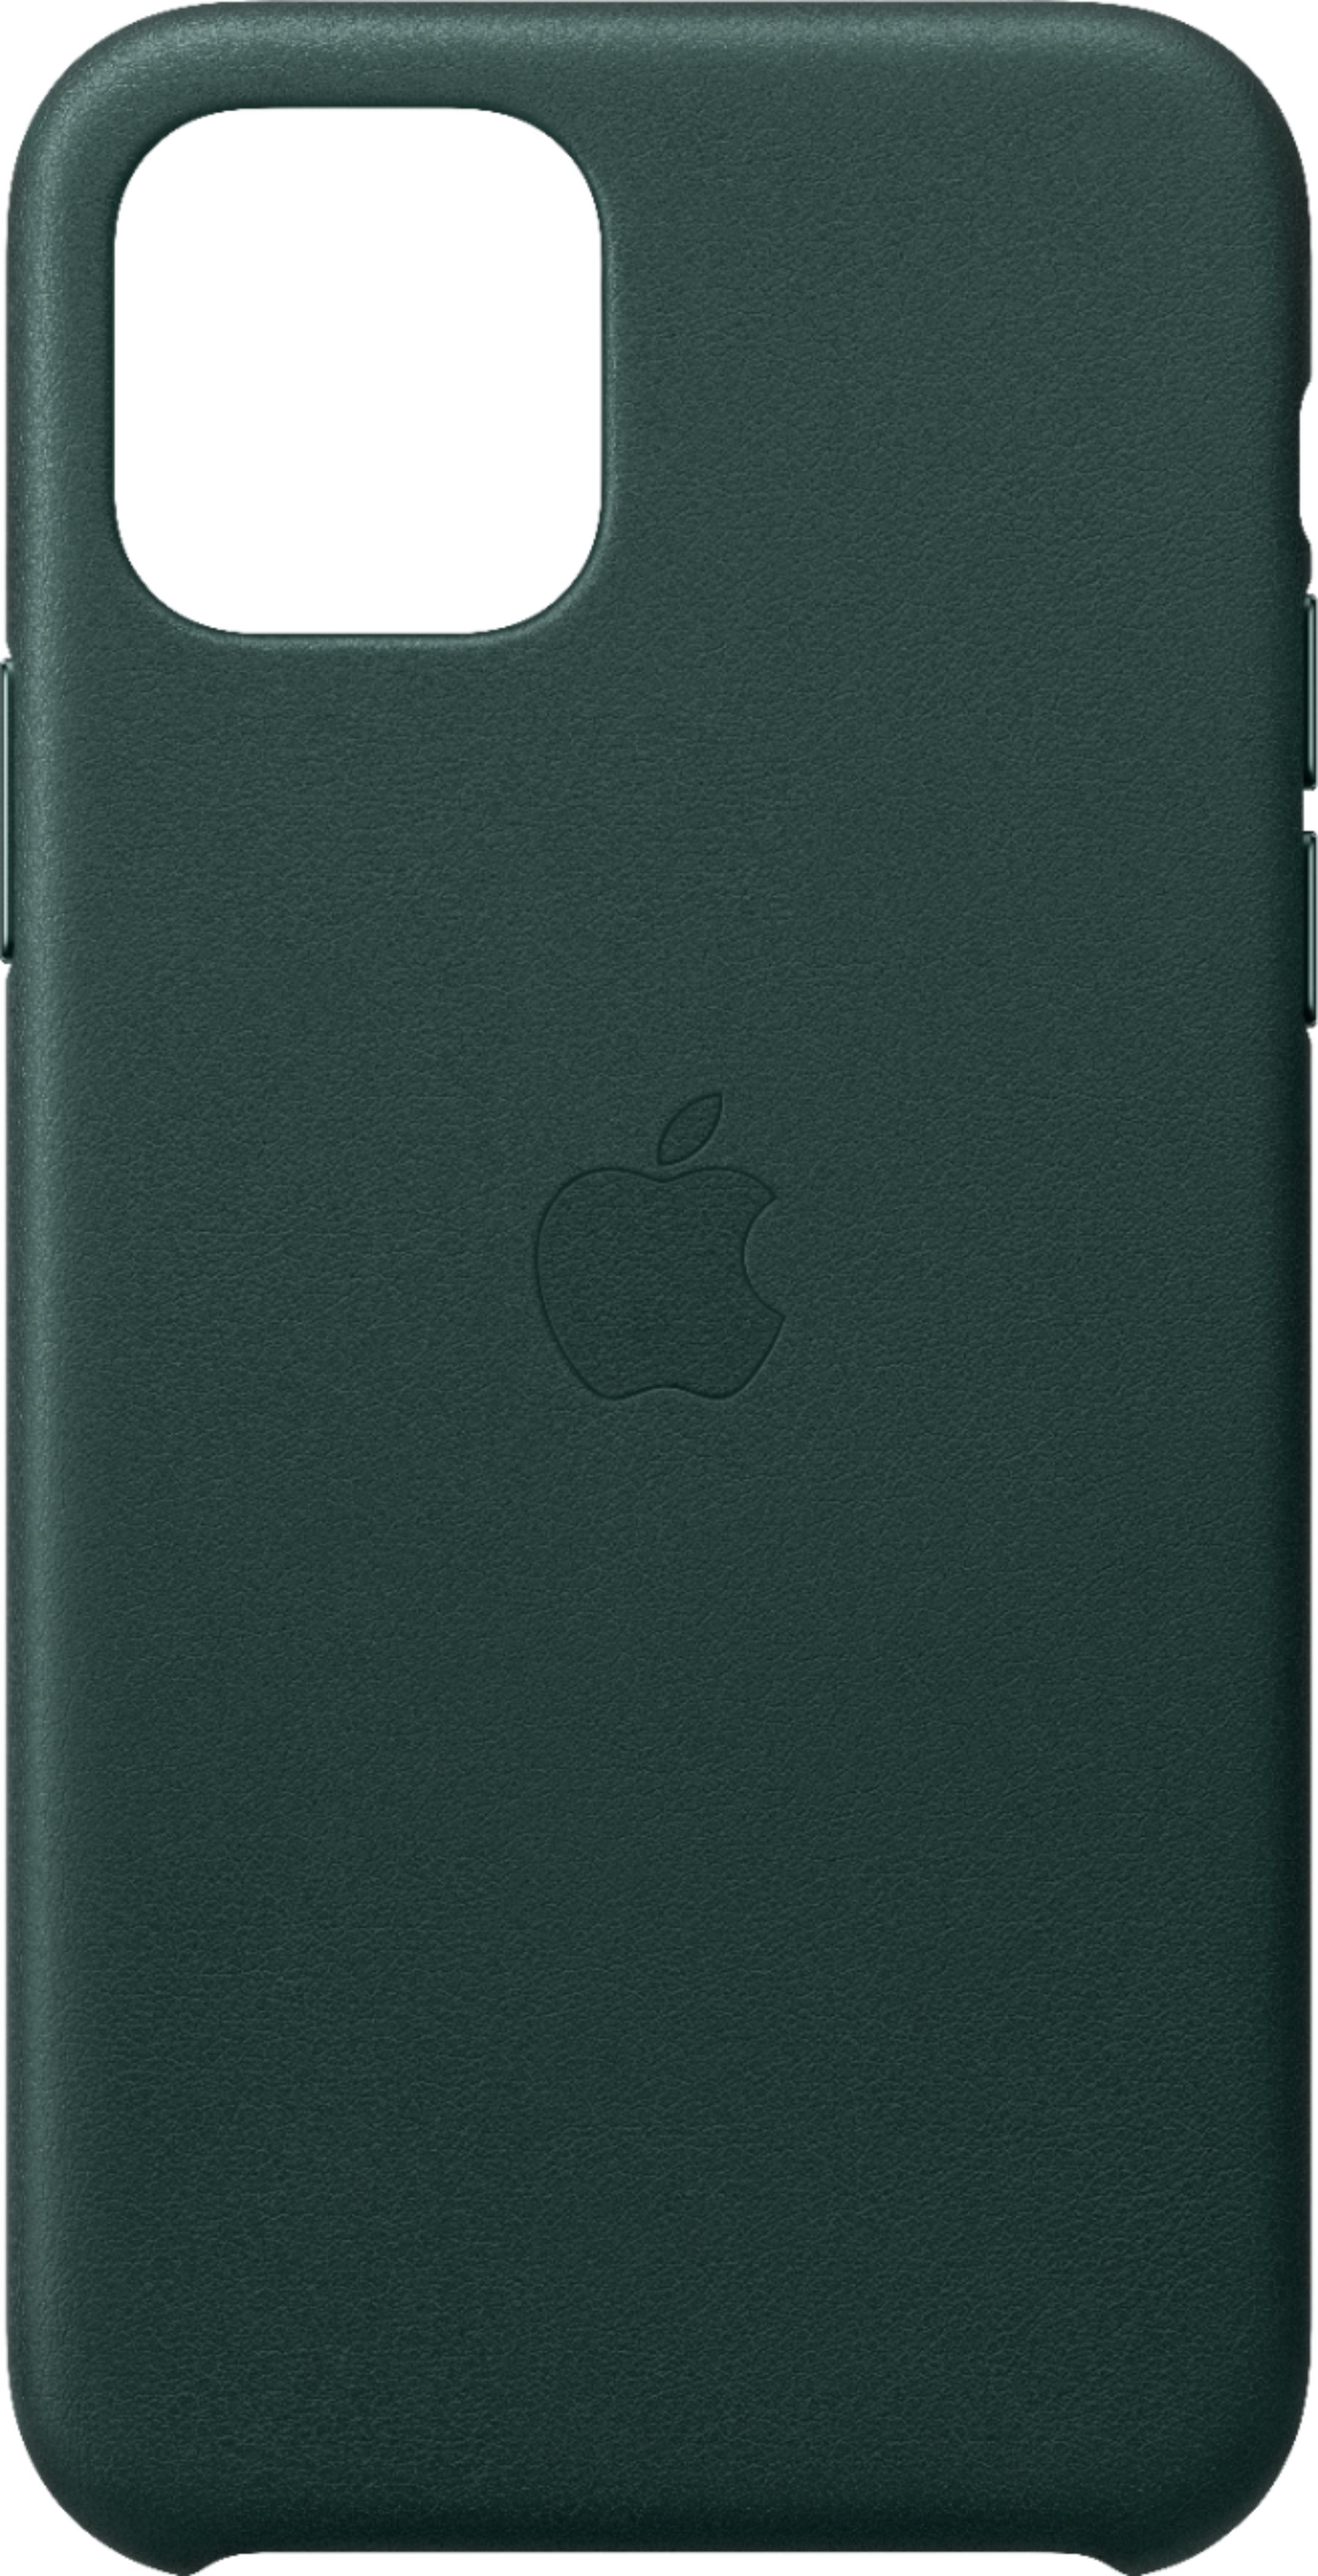 Apple Iphone 11 Pro Leather Case Forest Green Mwyc2zm A Best Buy